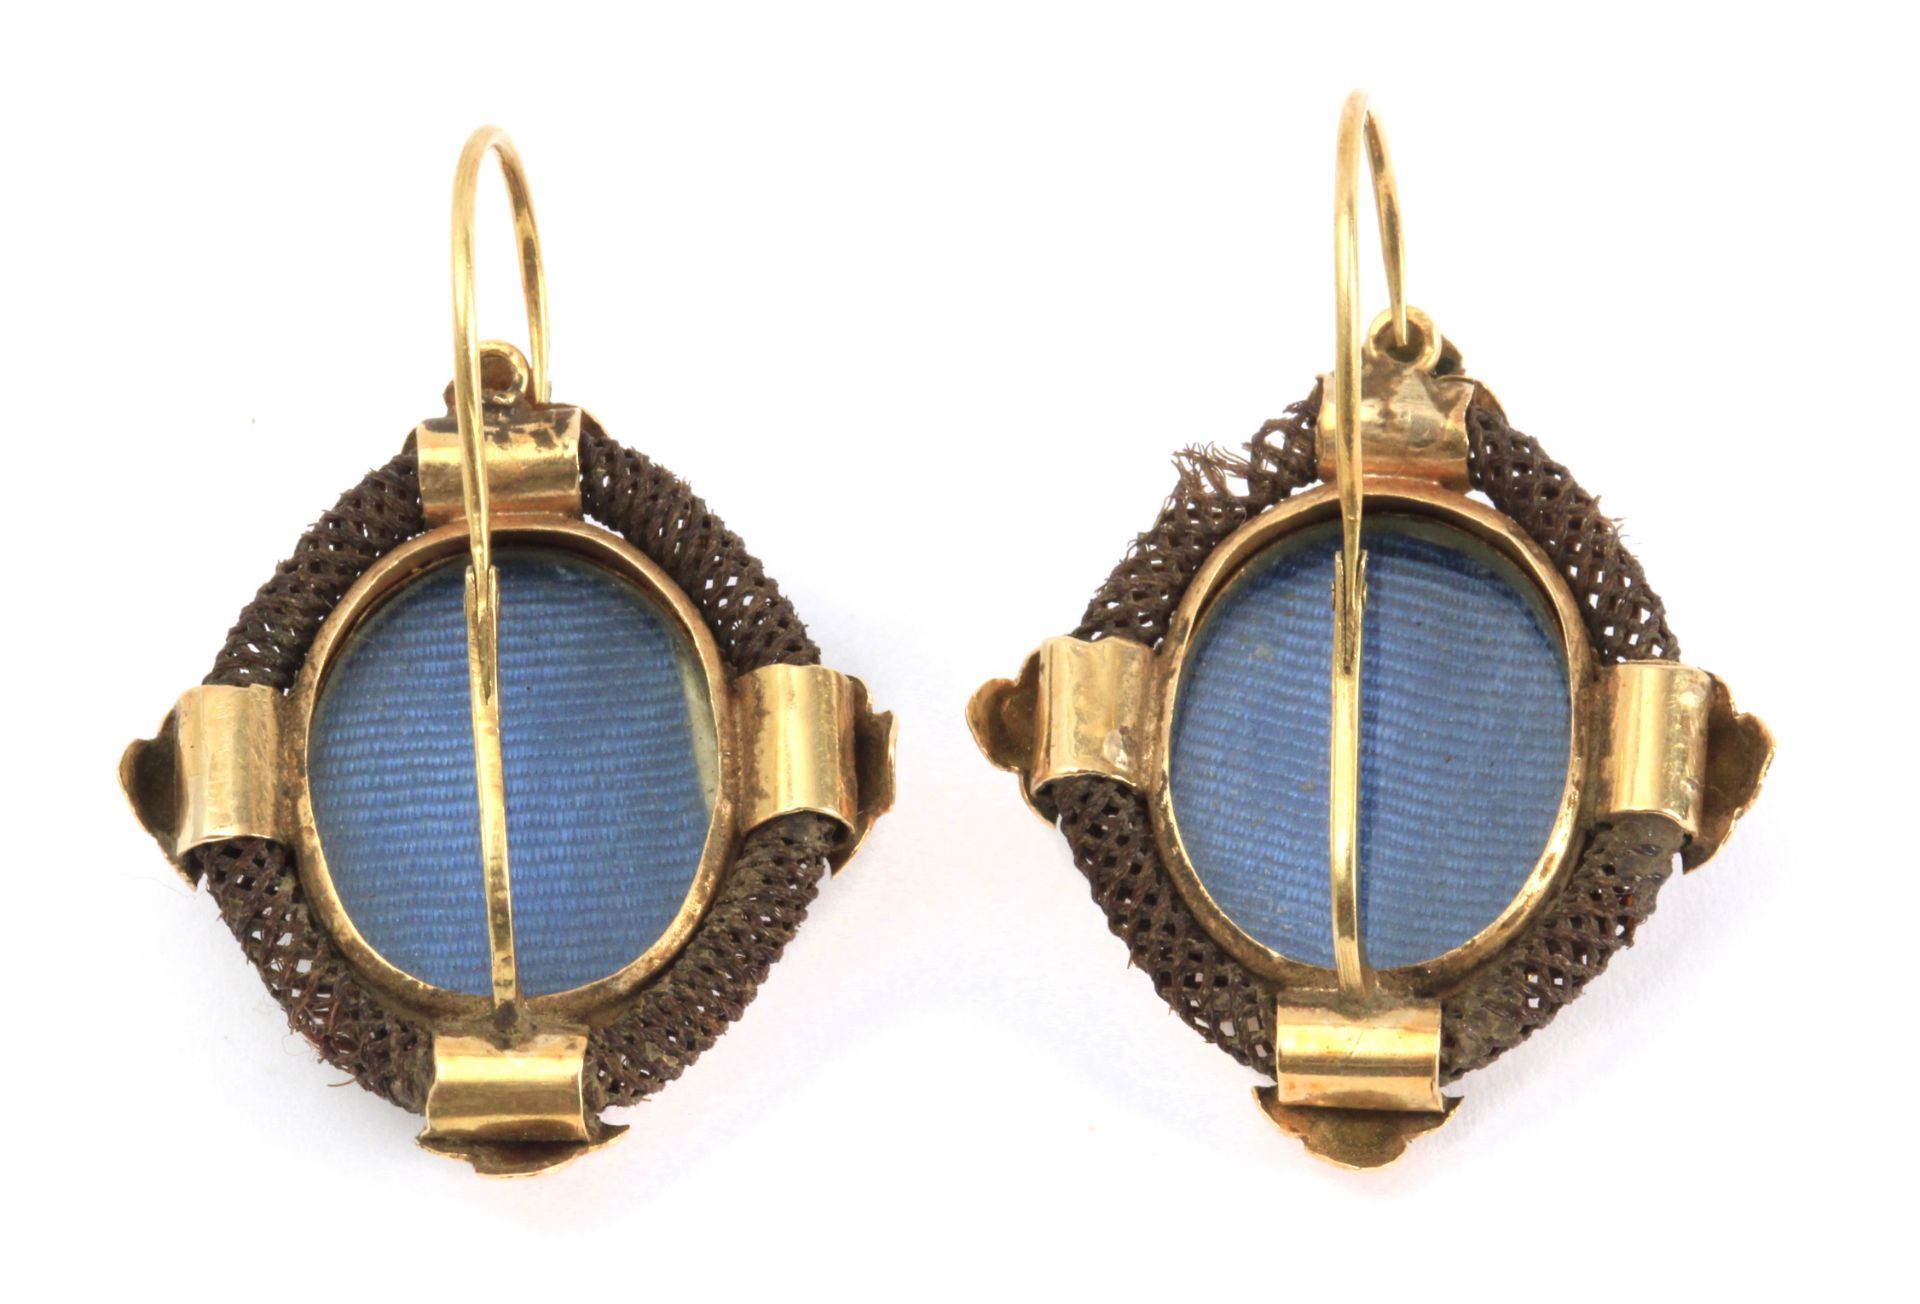 A pair of 19th century mourning earrings with a yellow gold setting, an ivory plaque and hairwork - Image 2 of 4